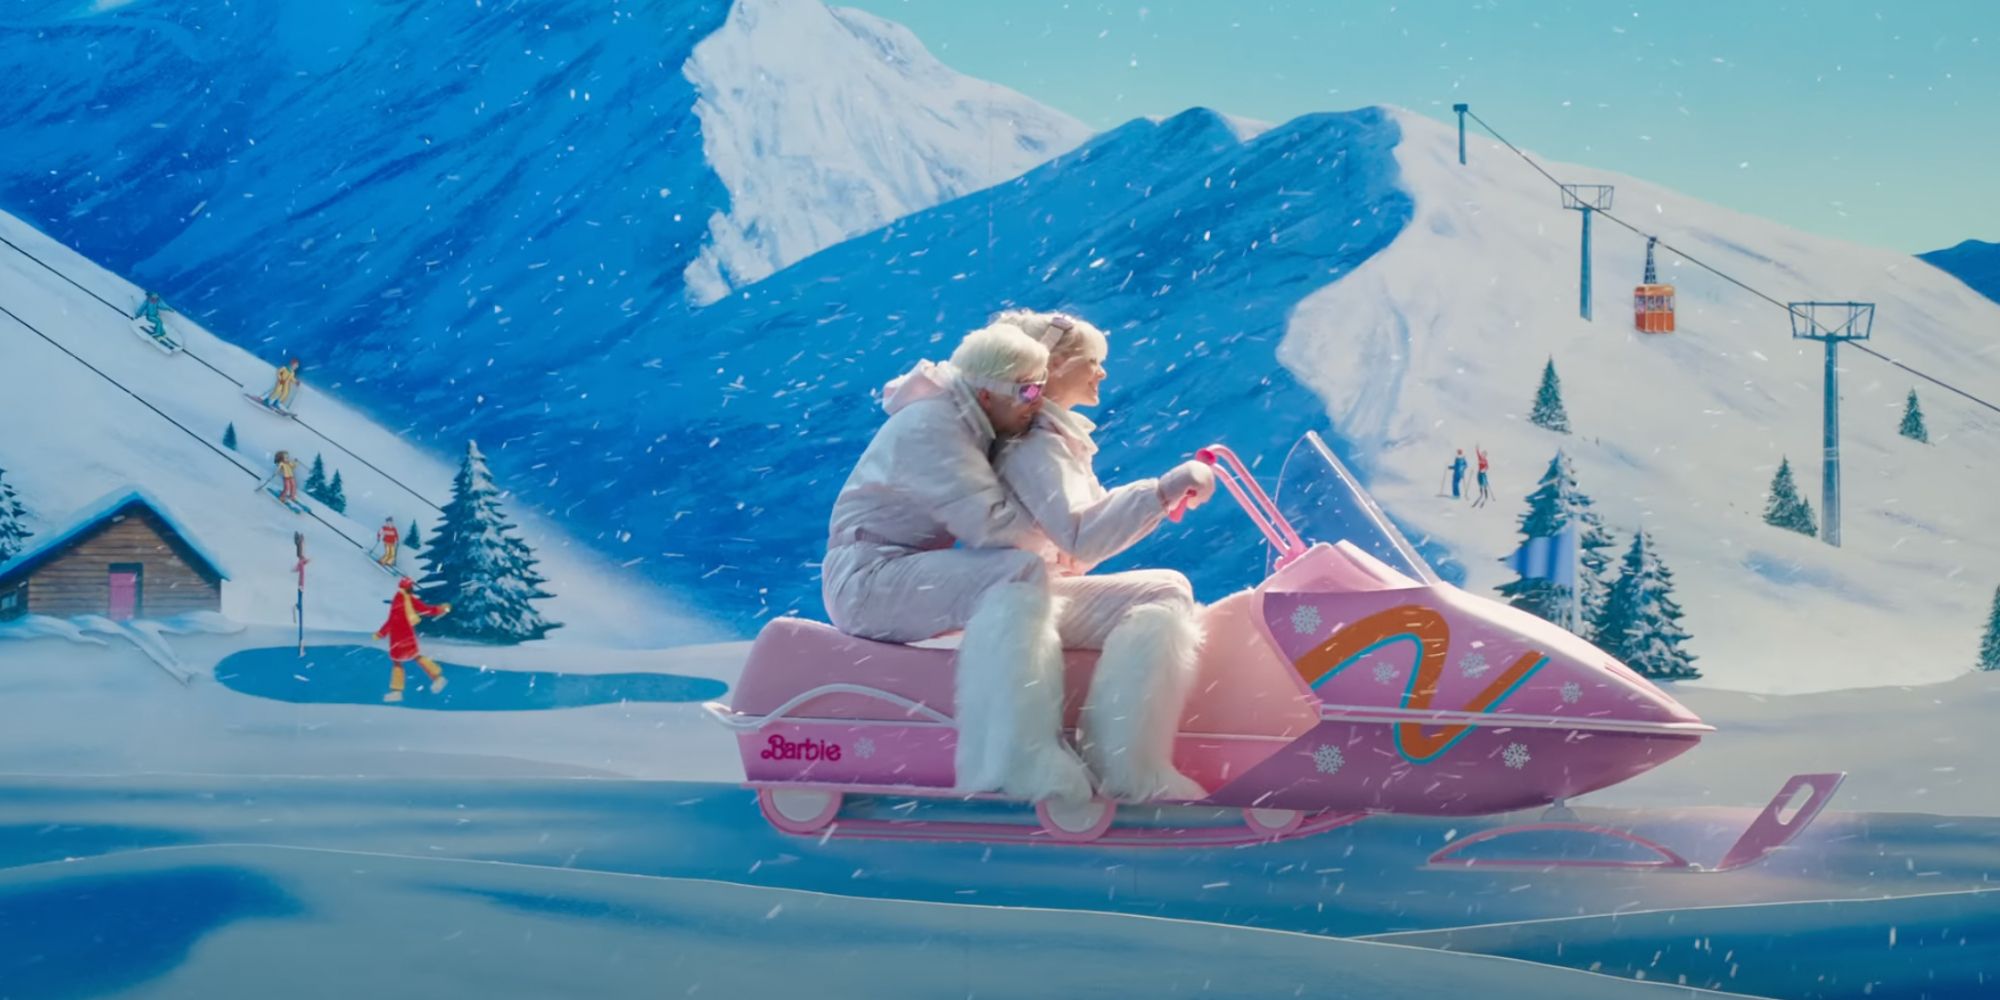 Barbie and Ken on a snowmobile in Barbie (2023)